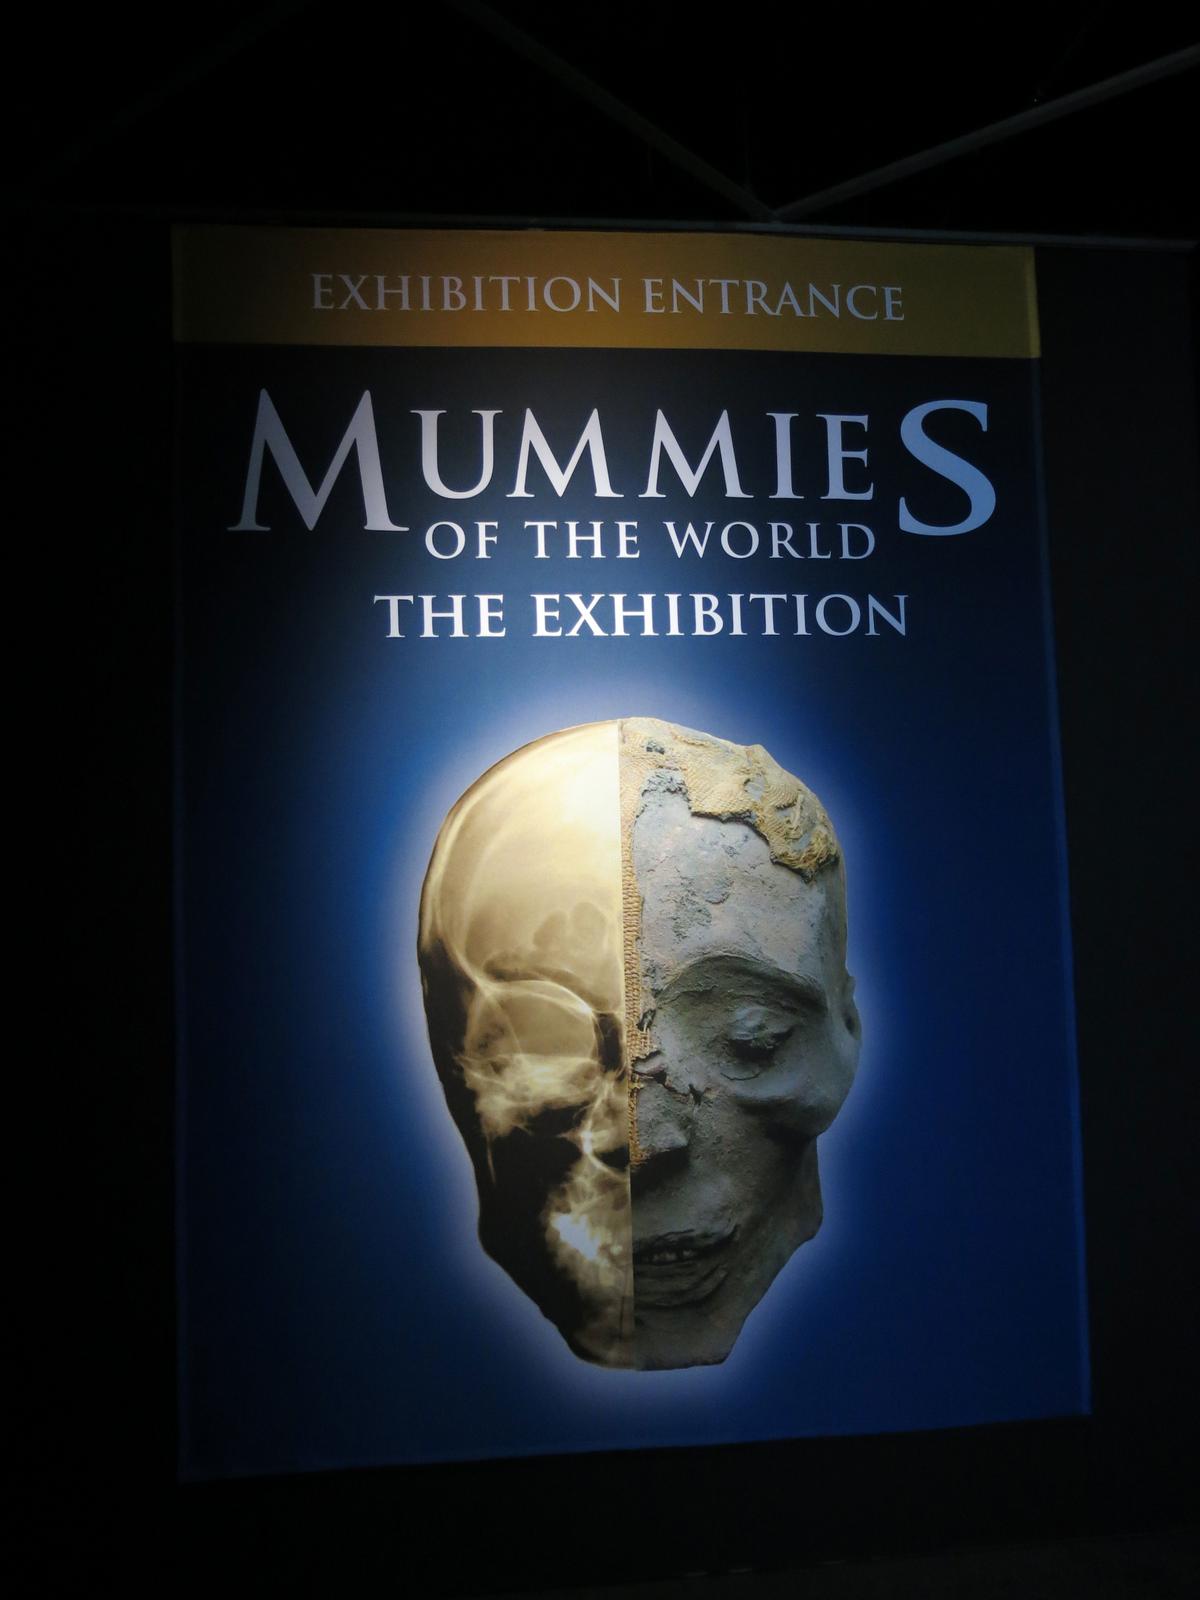 Inside the new Mummies of the World exhibit at the Maryland Science